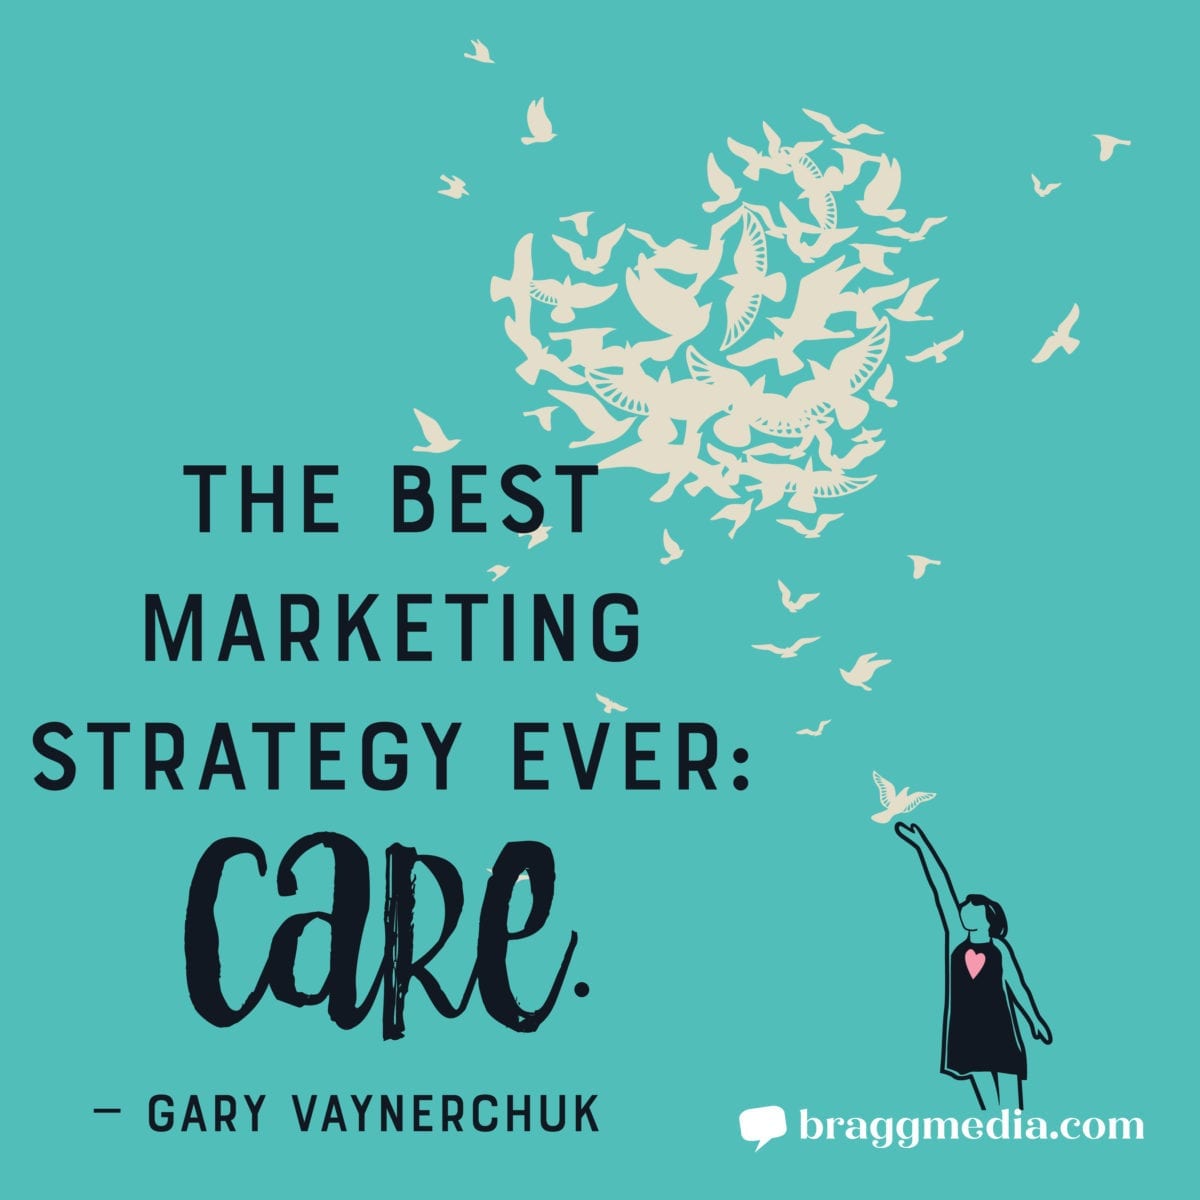 Purpose-driven marketing quote by gary vaynerchuk, "The best marketing strategy ever: care."